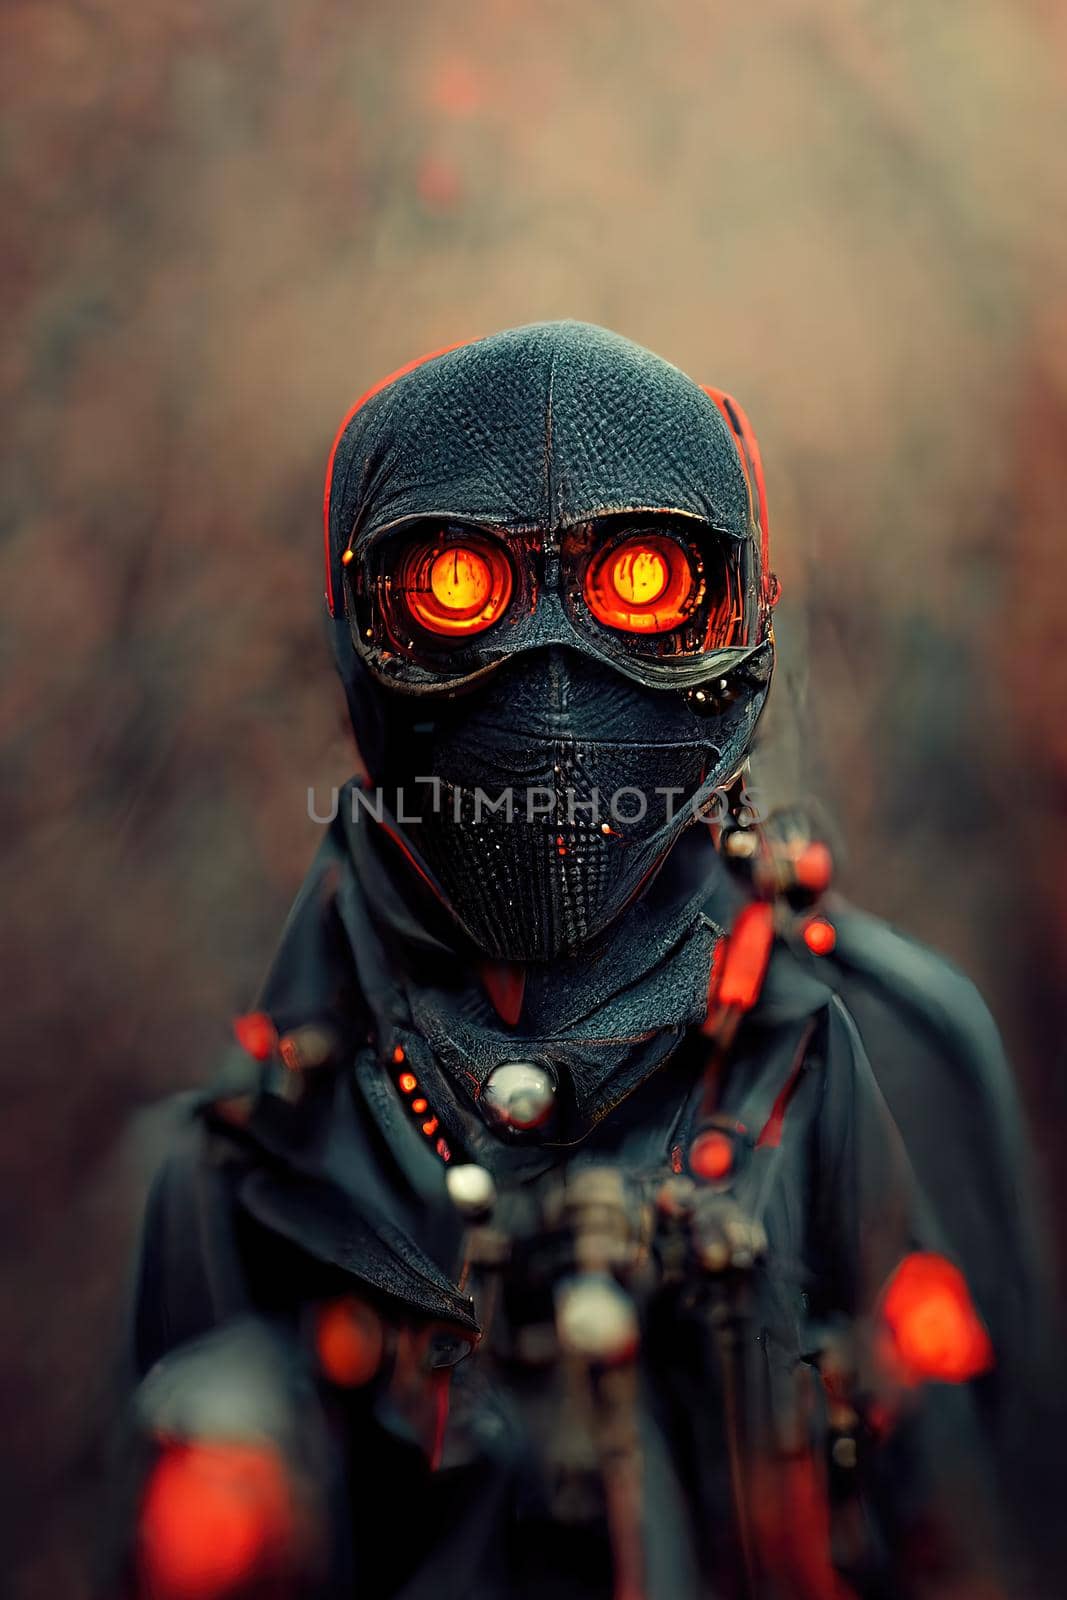 Modern ninja from the future, 3d render by Farcas